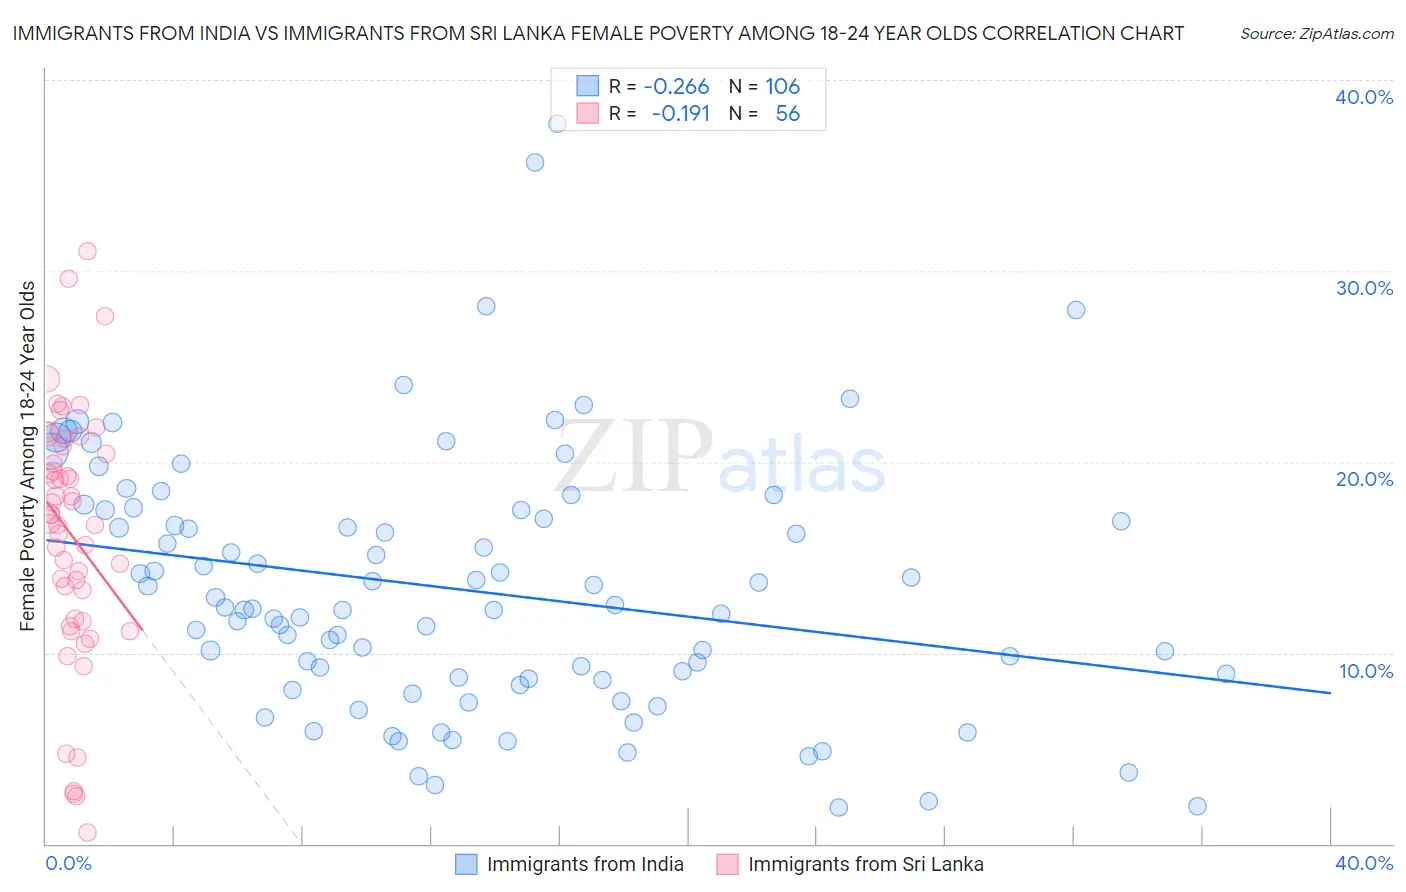 Immigrants from India vs Immigrants from Sri Lanka Female Poverty Among 18-24 Year Olds